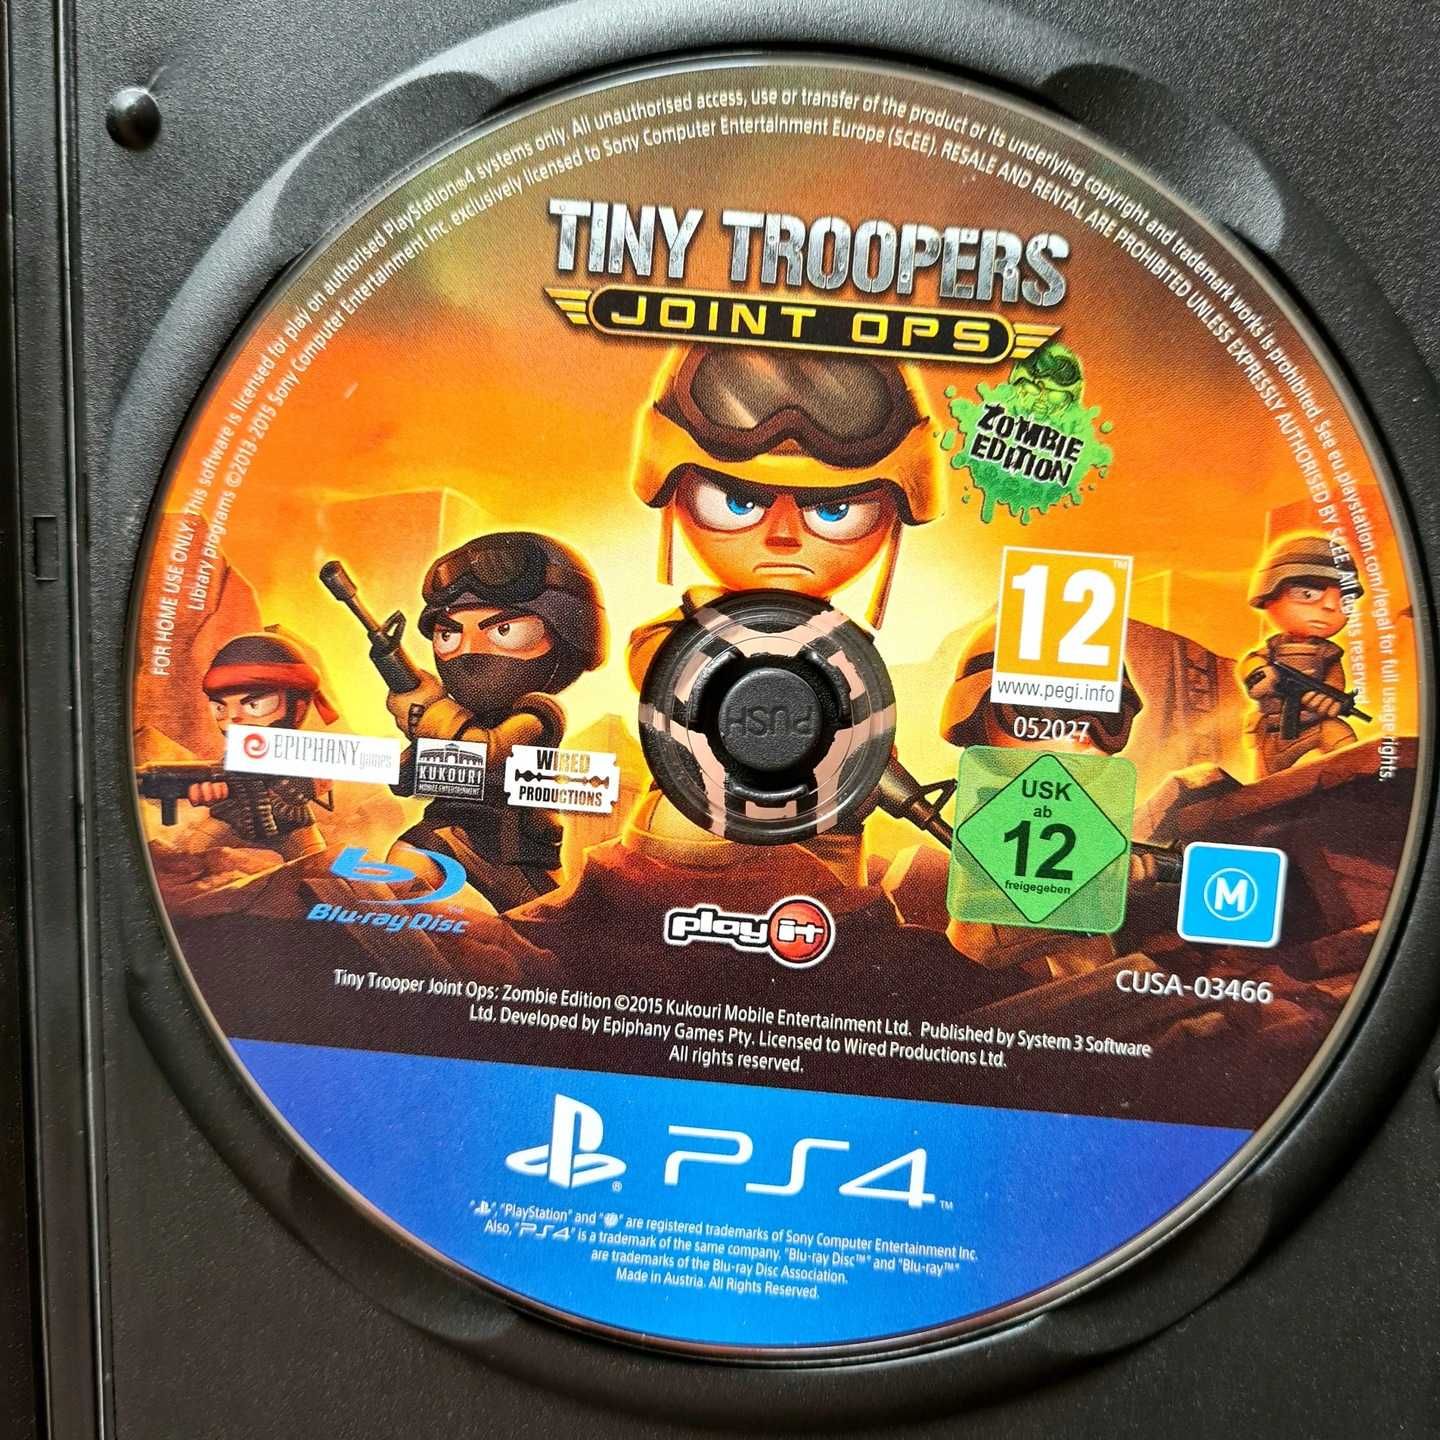 Tiny Troopers Joint Ops Zombie Edition Ps4